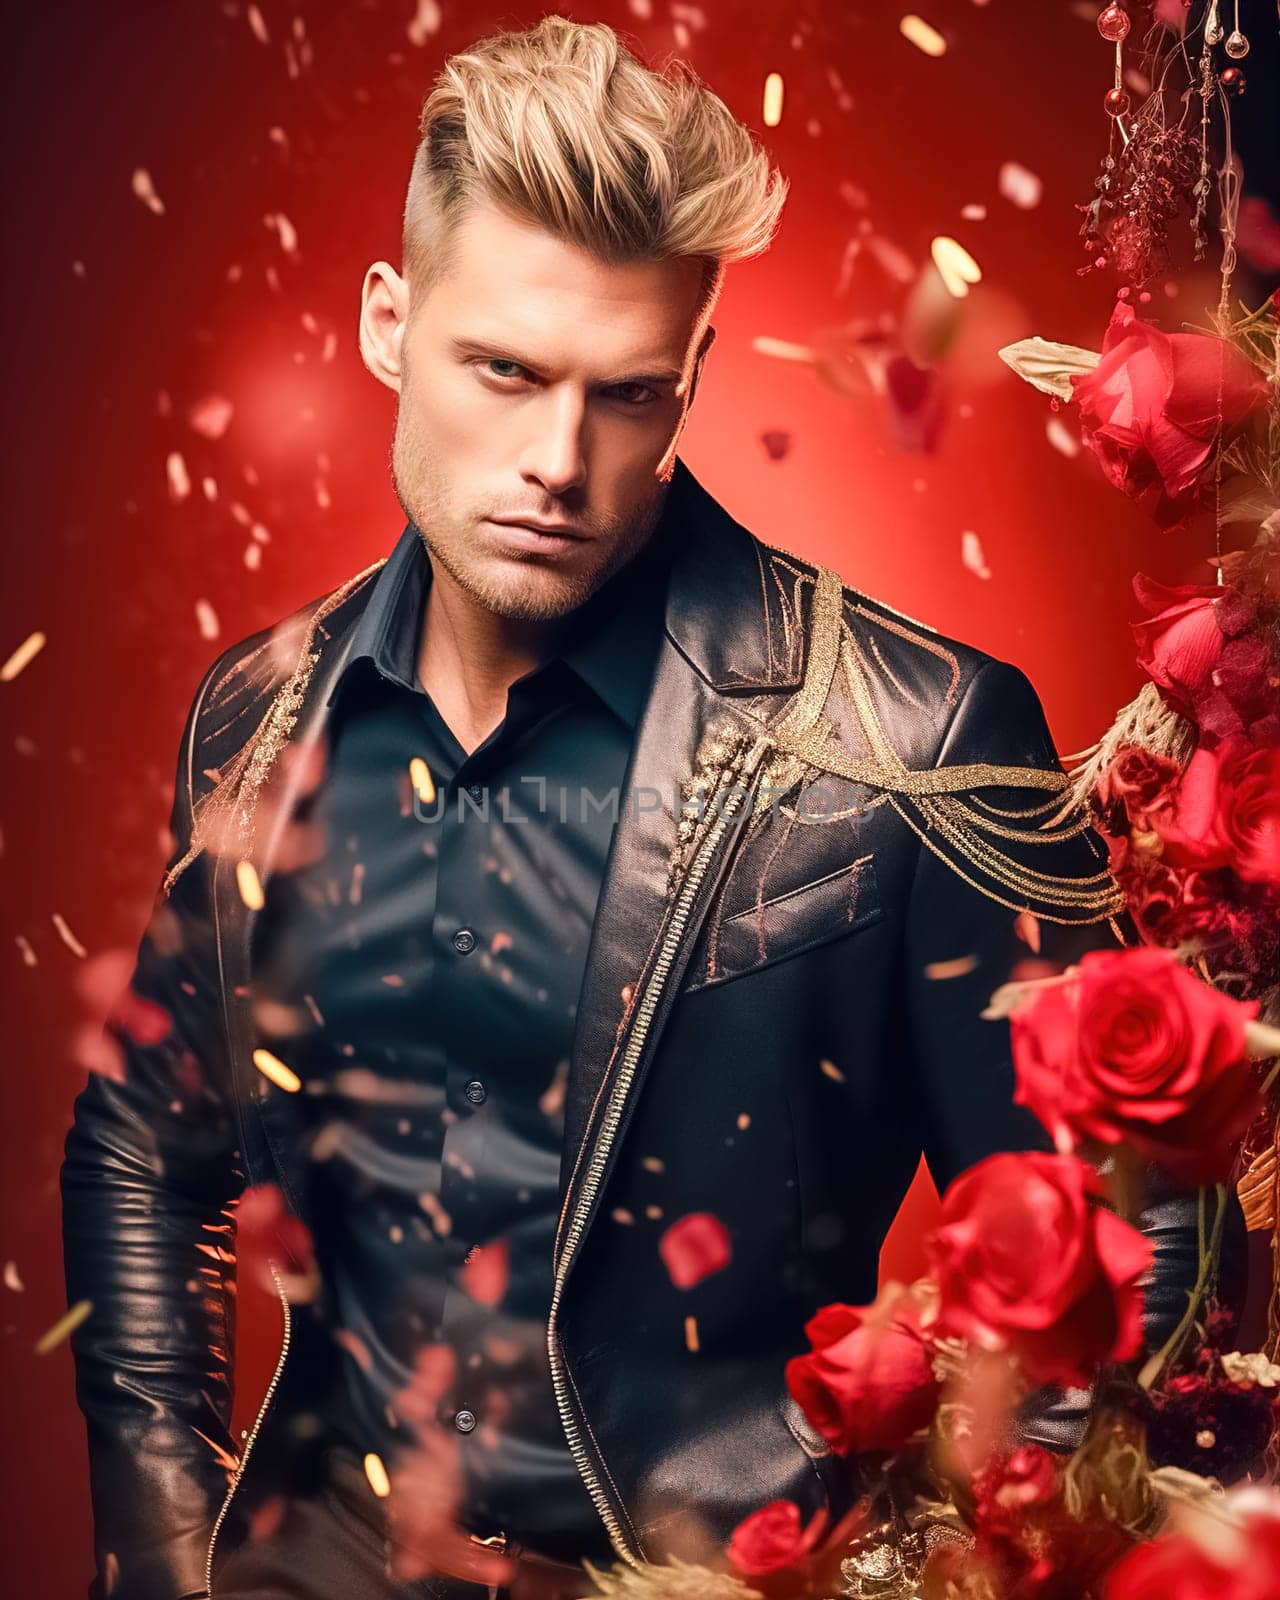 Stylish fashionable blond man in a leather jacket from famous brands. by Yurich32